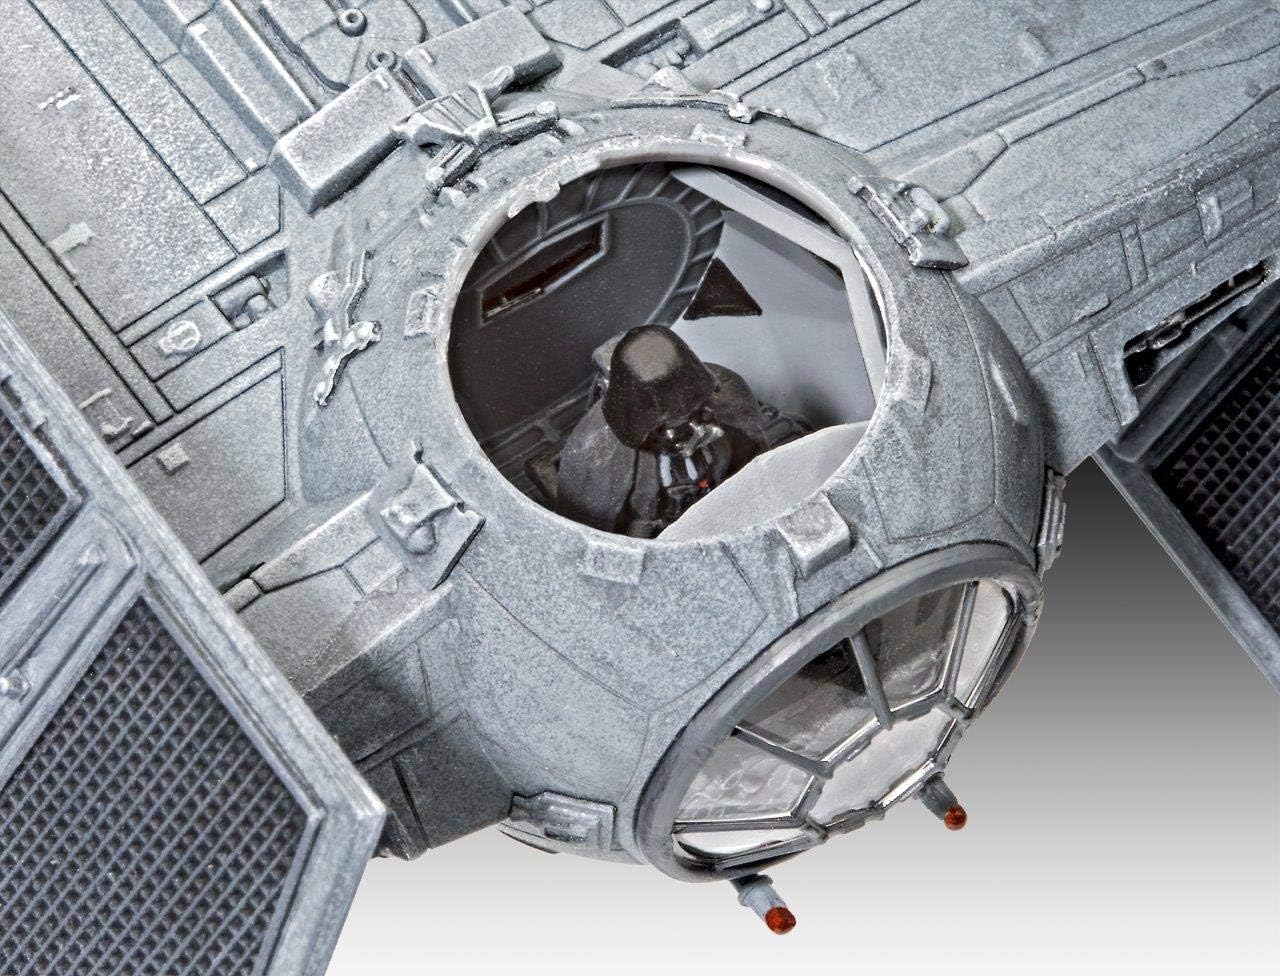 Darth Vaders TIE Fighter 1:72 Scale Kit